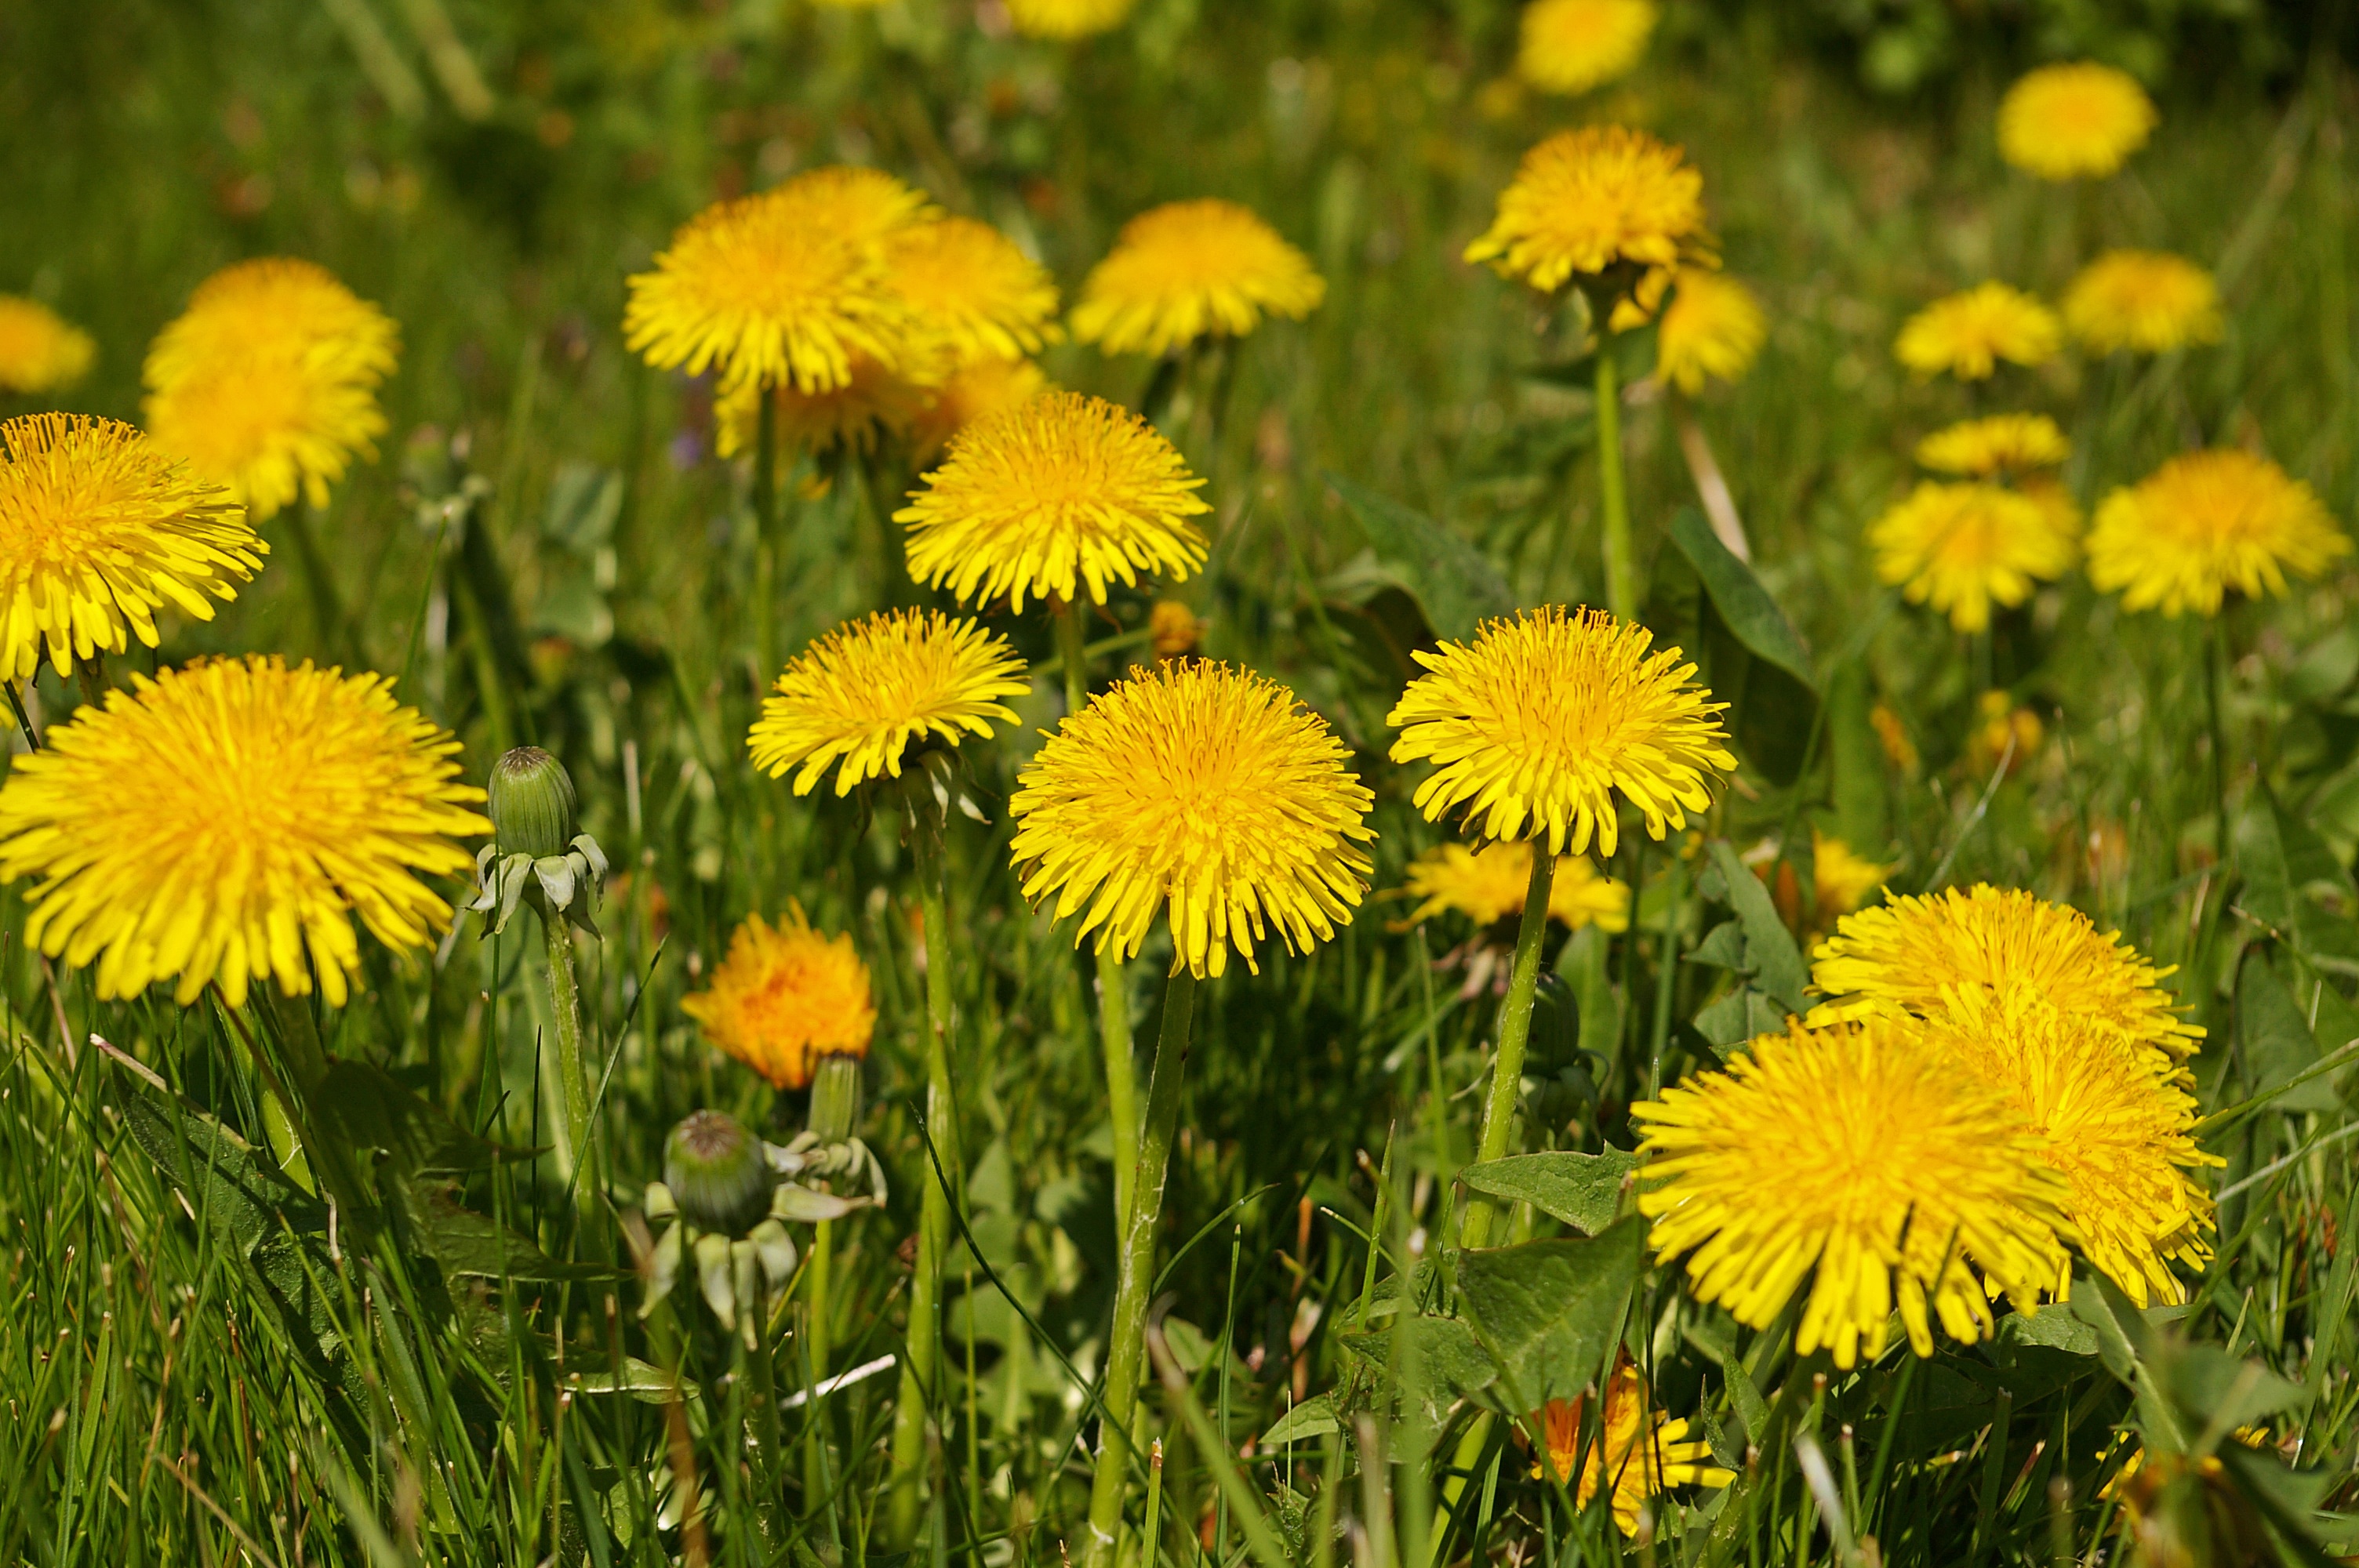 Wallpaper with yellow dandelions free image download